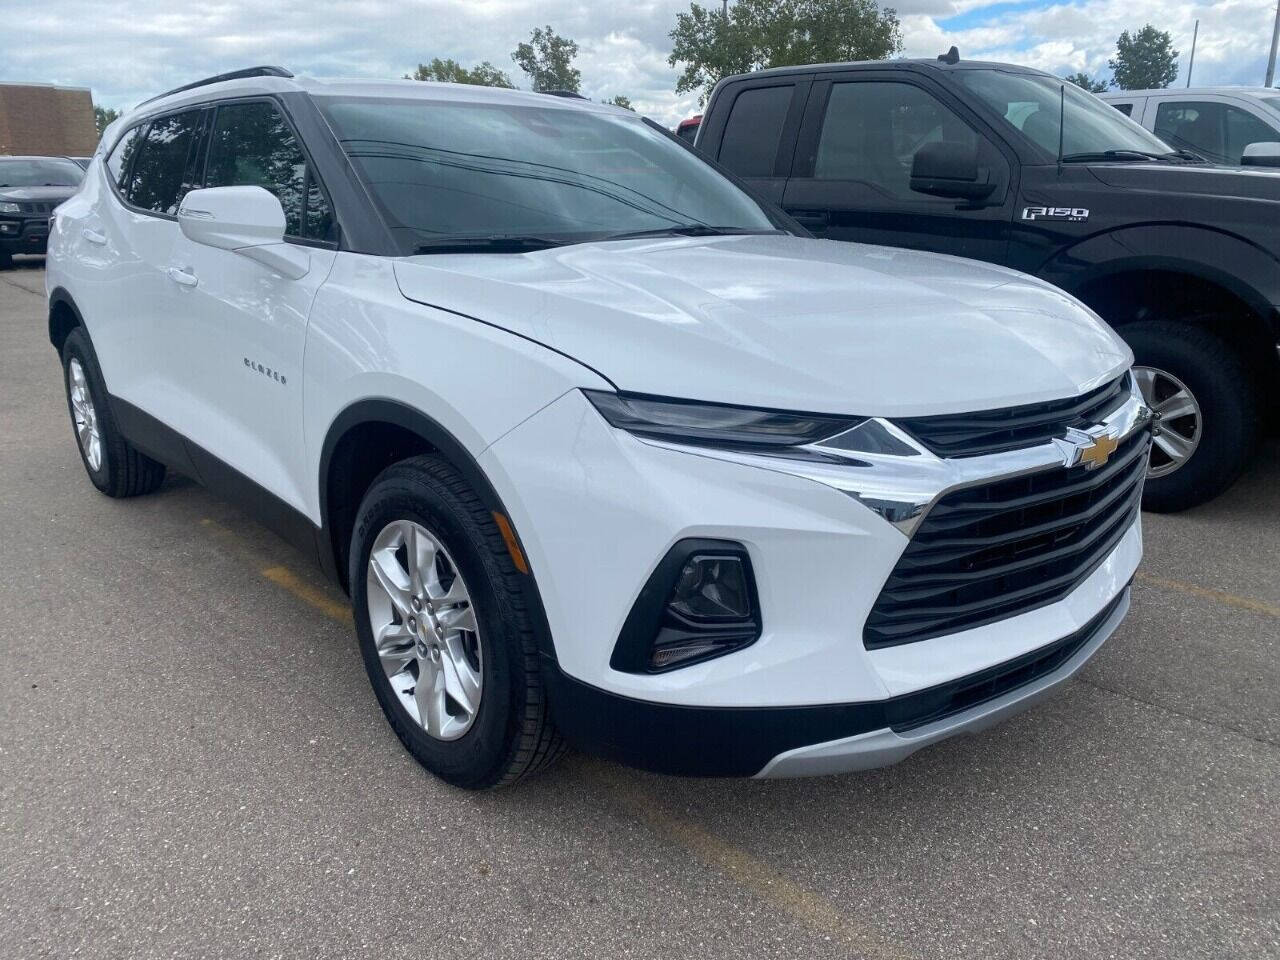 New and used Chevrolet Blazer for sale